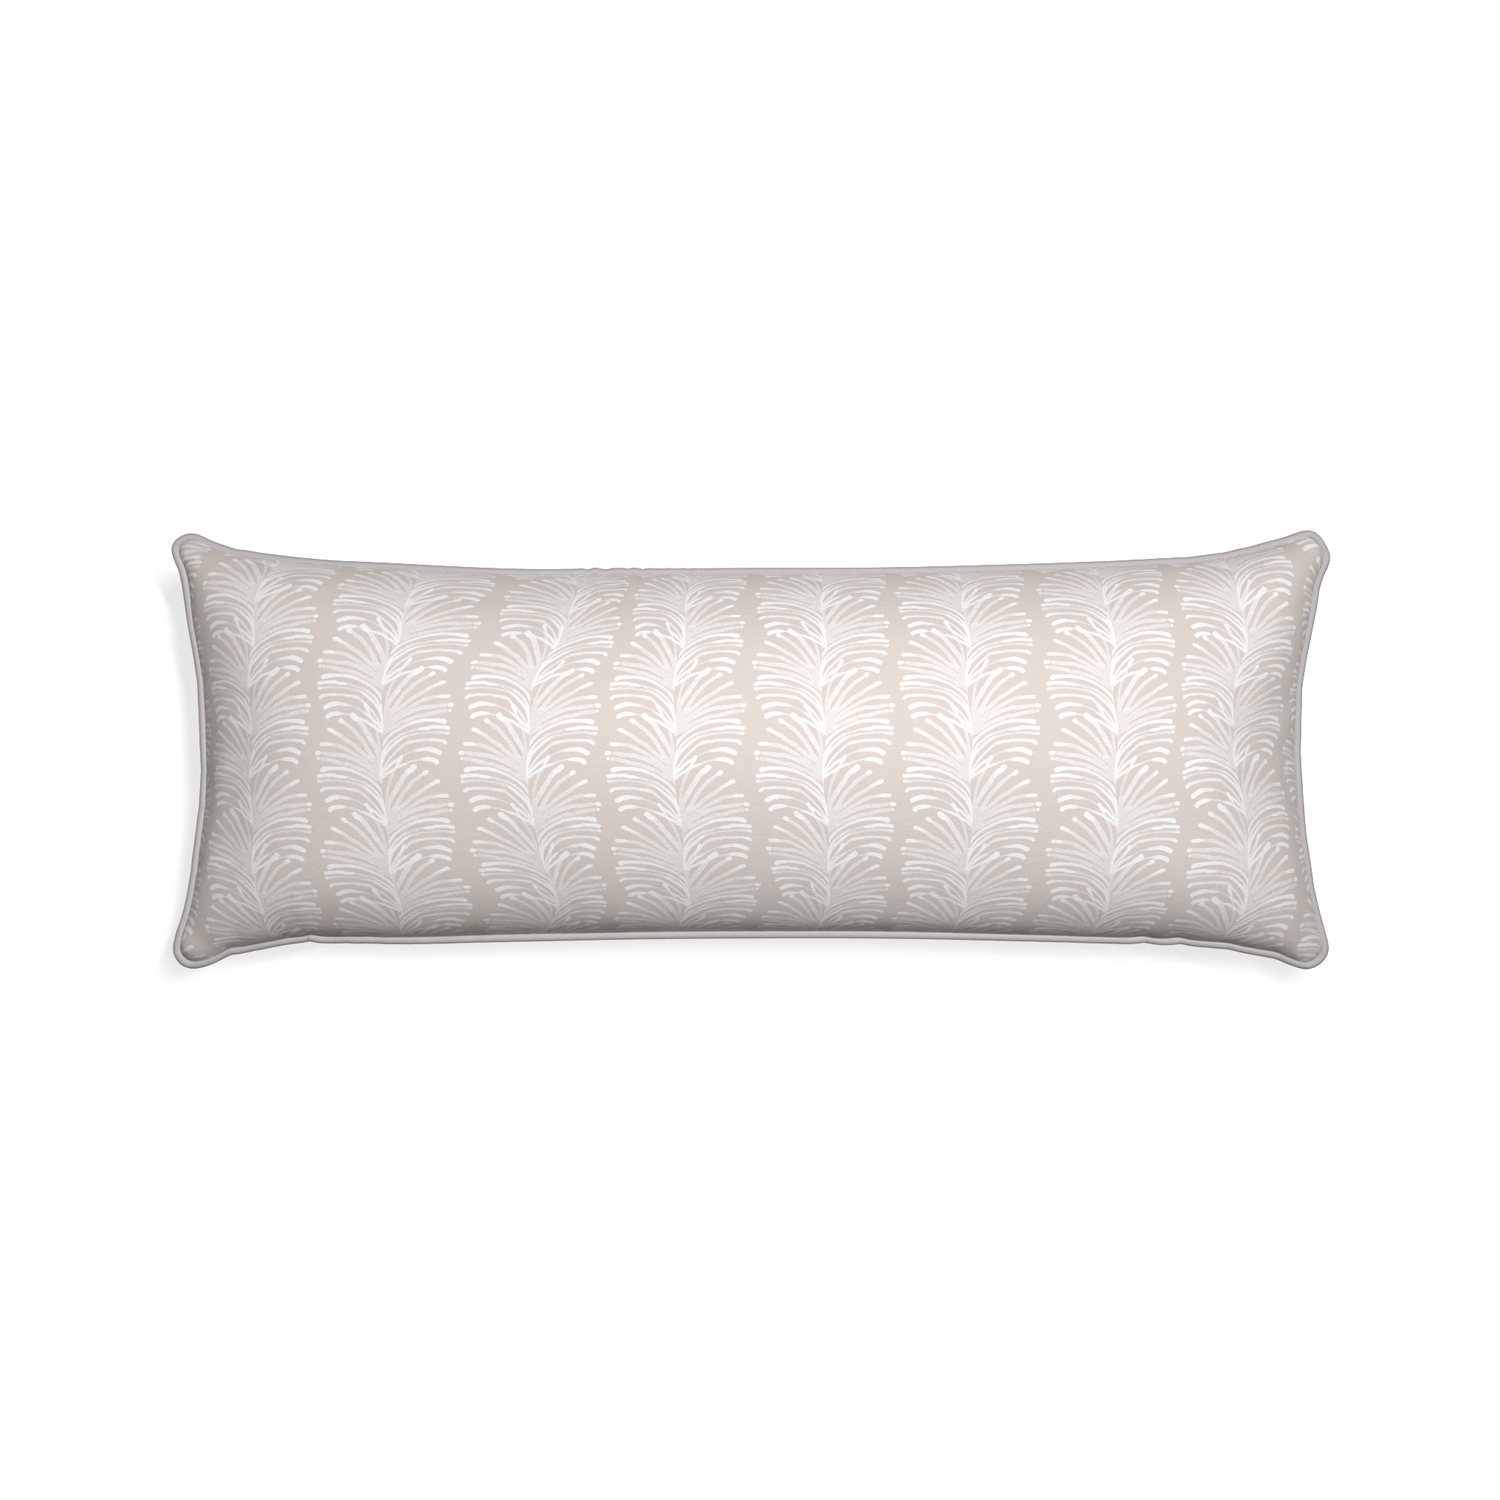 Xl-lumbar emma sand custom sand colored botanical stripepillow with pebble piping on white background